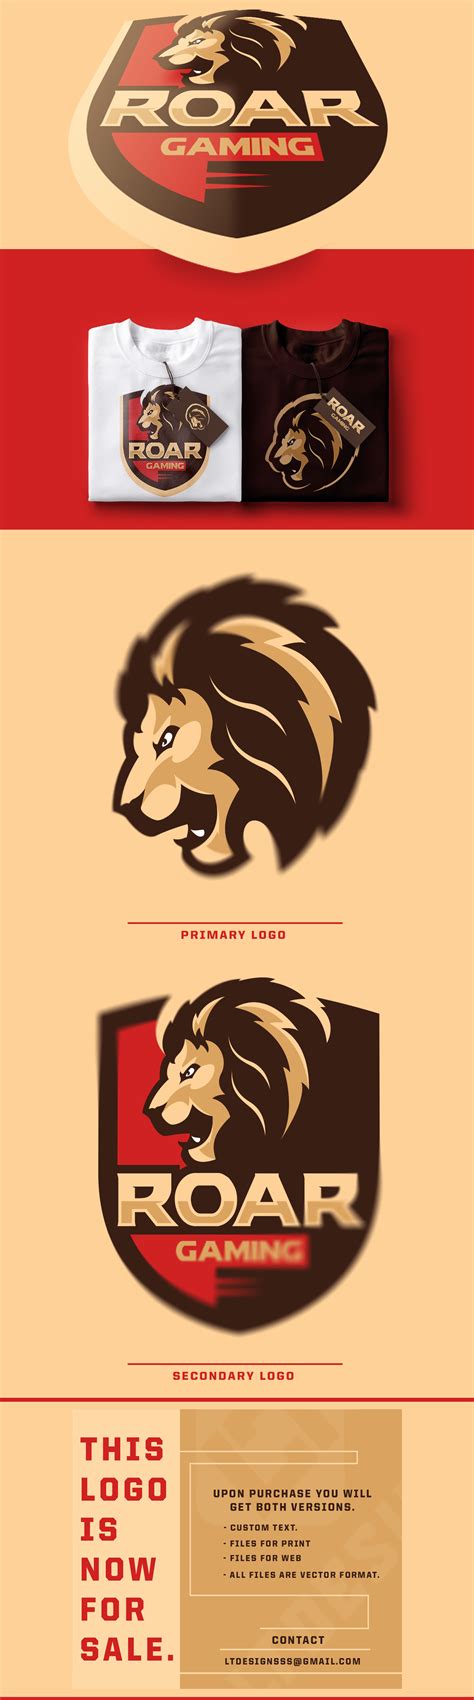 Roar Gaming Project Logo For Sale On Behance